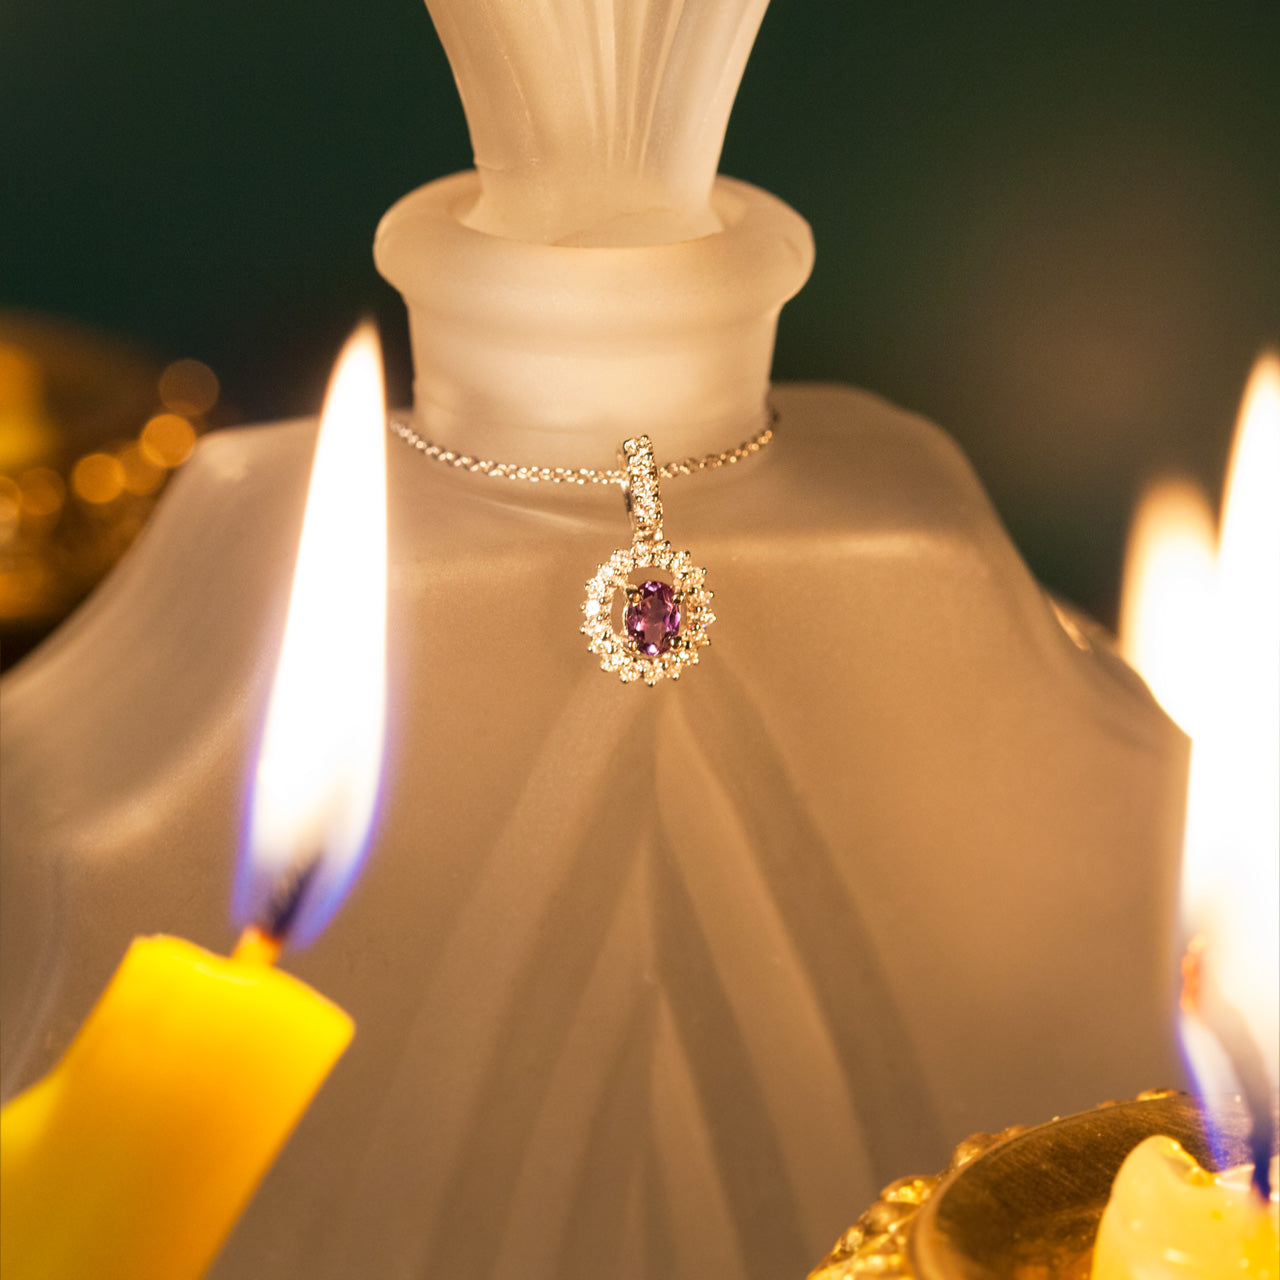 Candlelight reflecting off a 0.20ct alexandrite stone set in an 18k white gold pendant